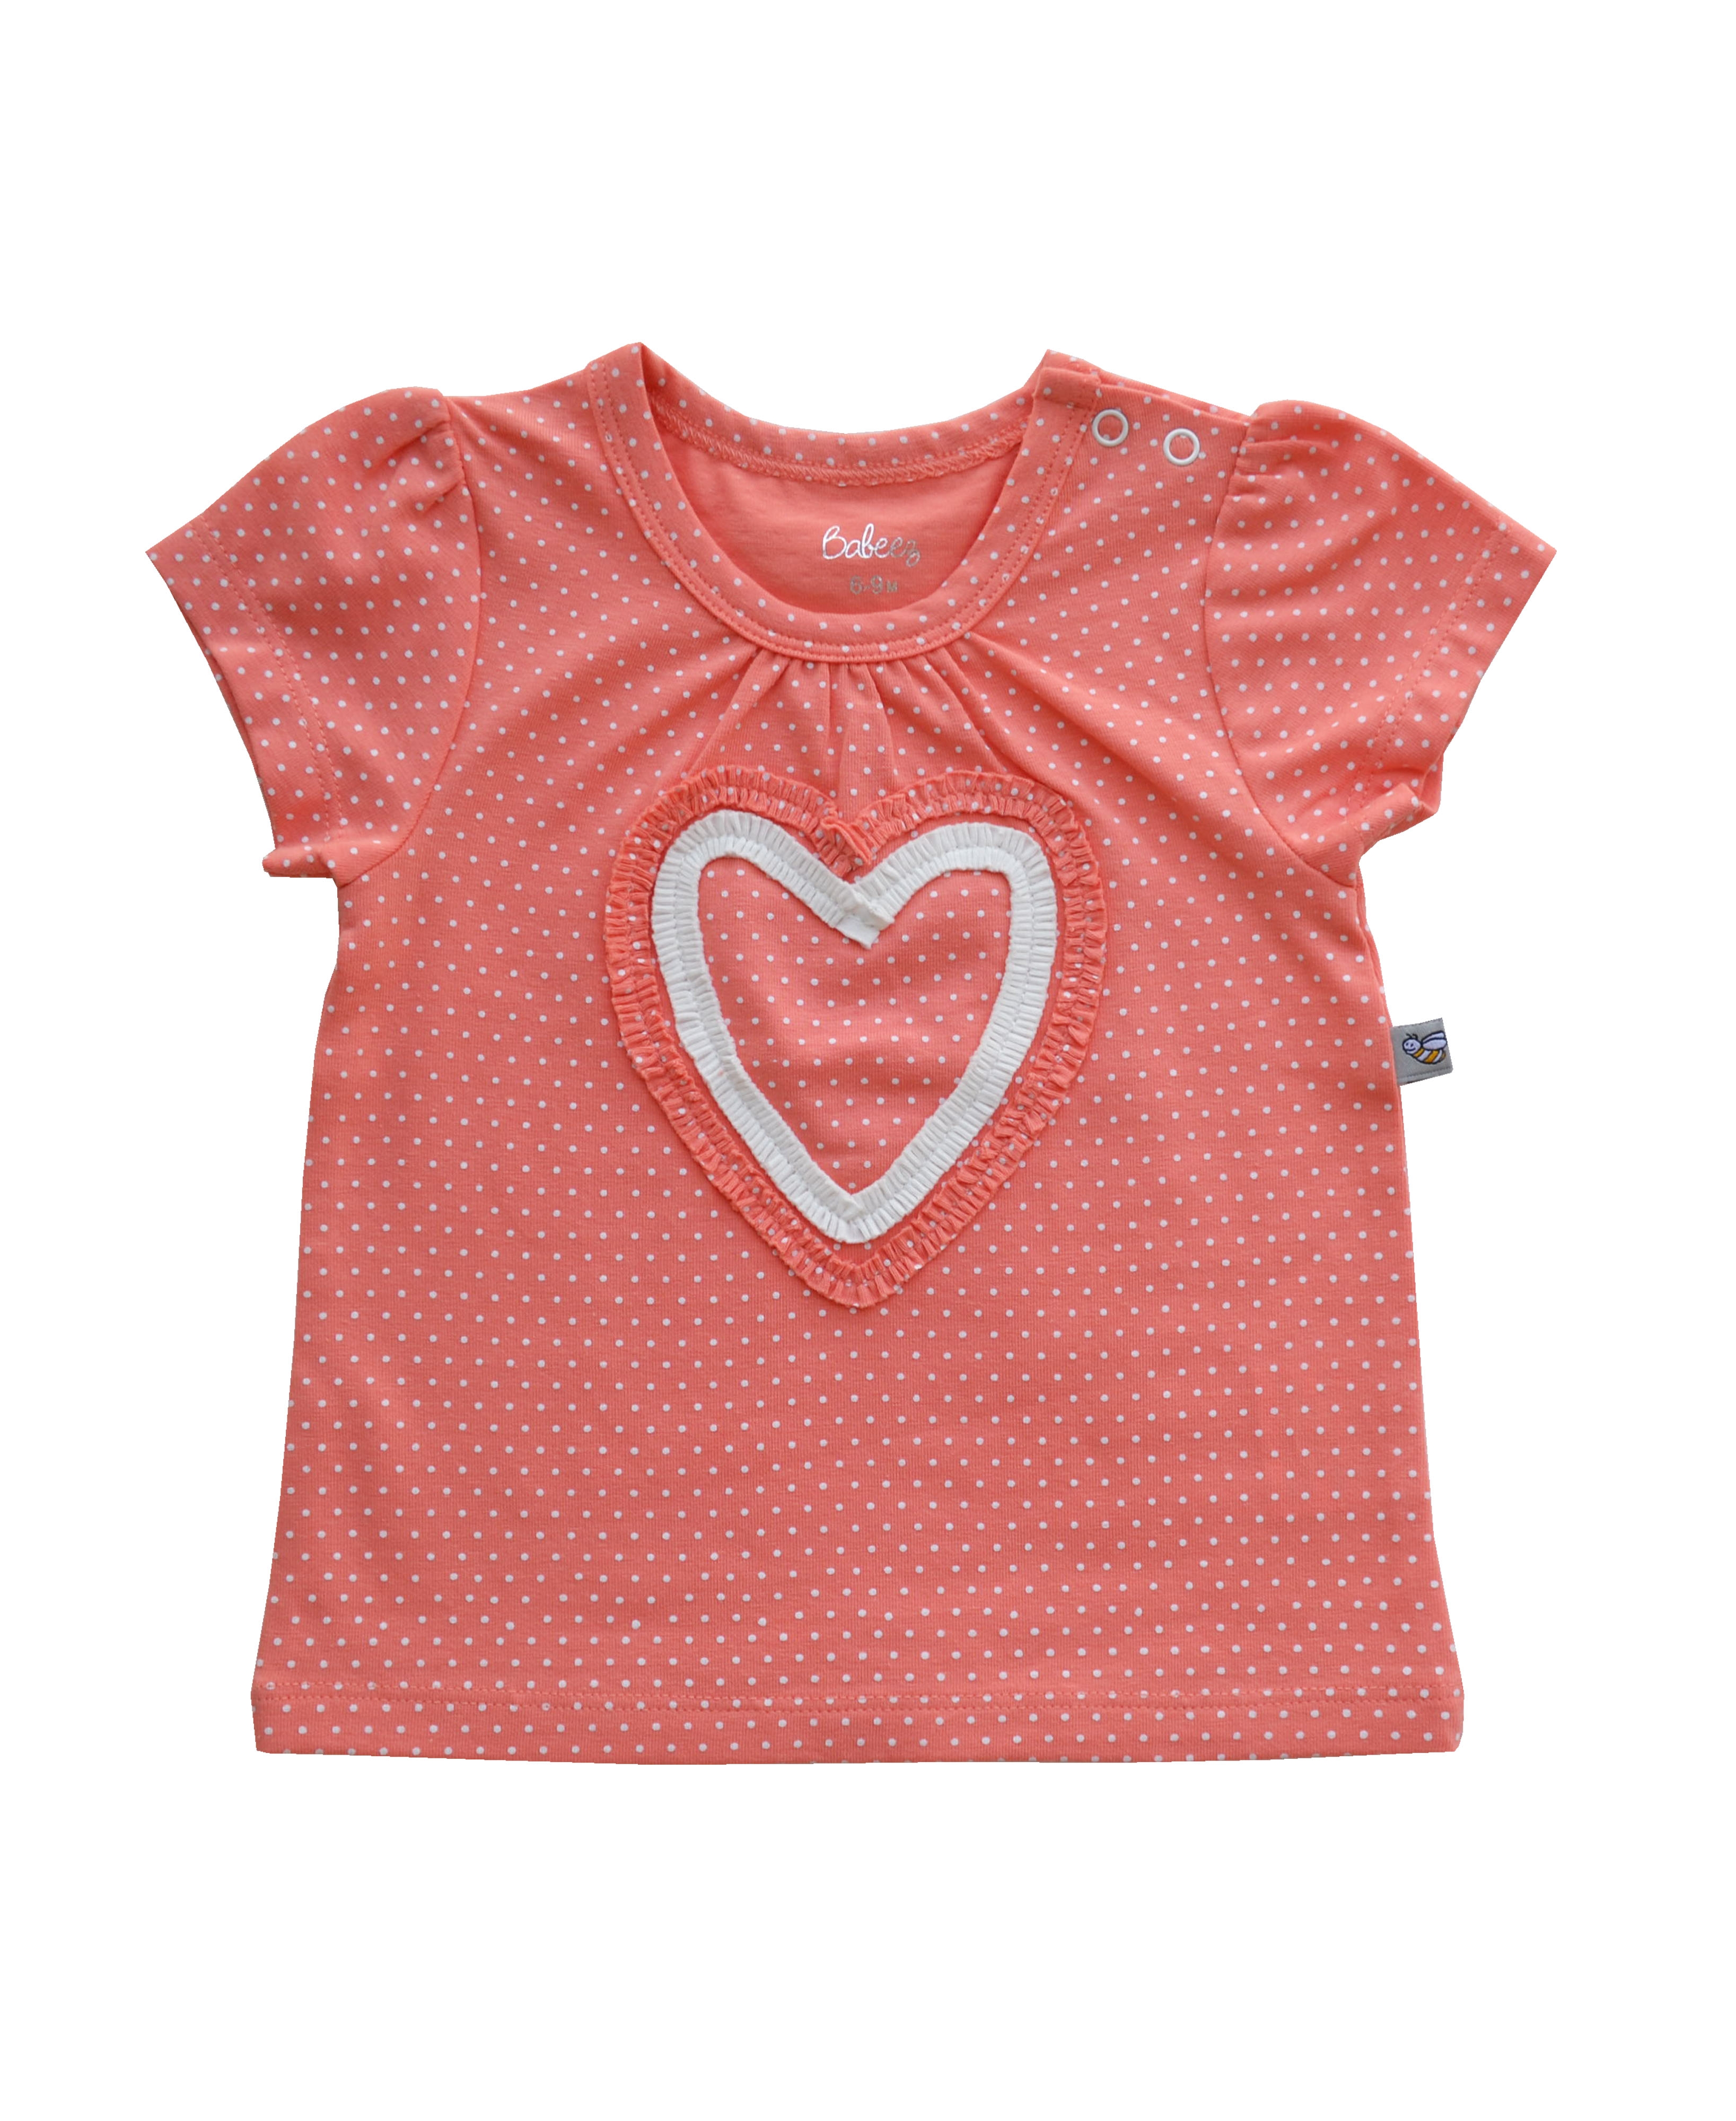 Babeez | Allover White Dots Print on Orange Short Sleeves Top with Heart Applique (95% Cotton 5% Elasthan) undefined